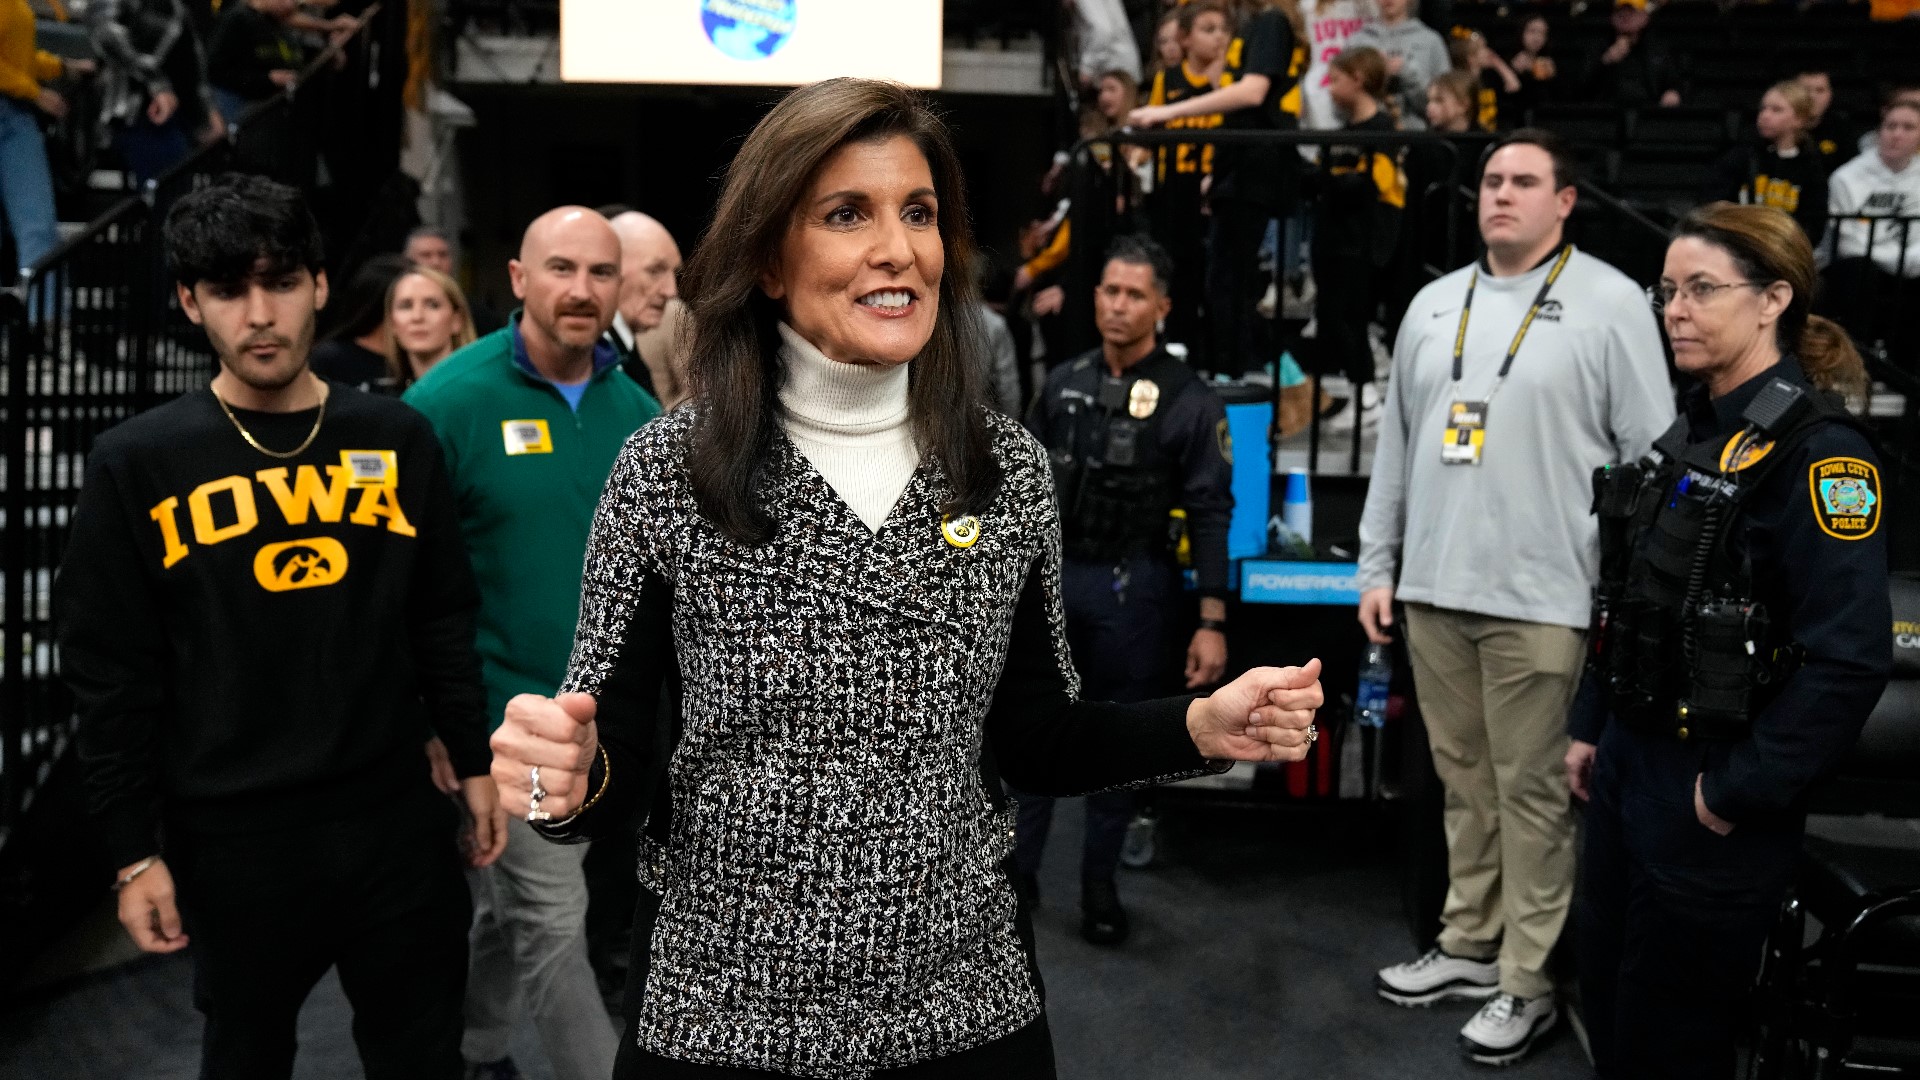 "You know, Iowa starts it. You know that [New Hampshire voters] correct it... and then my sweet state of South Carolina brings it home," Haley said.